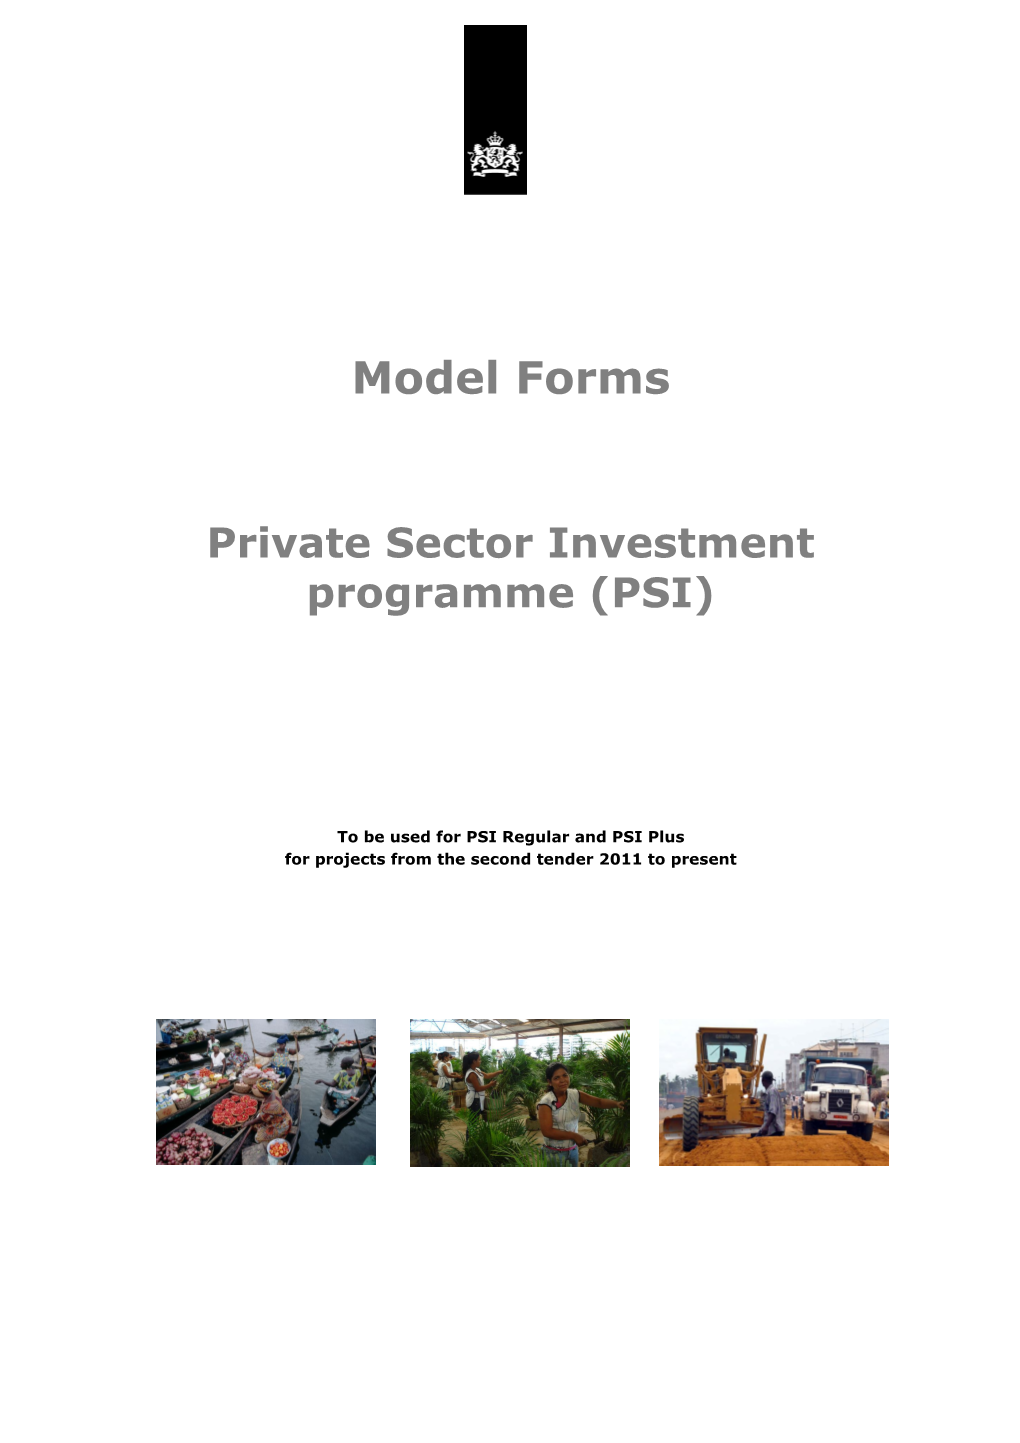 Private Sector Investment Programme (PSI)